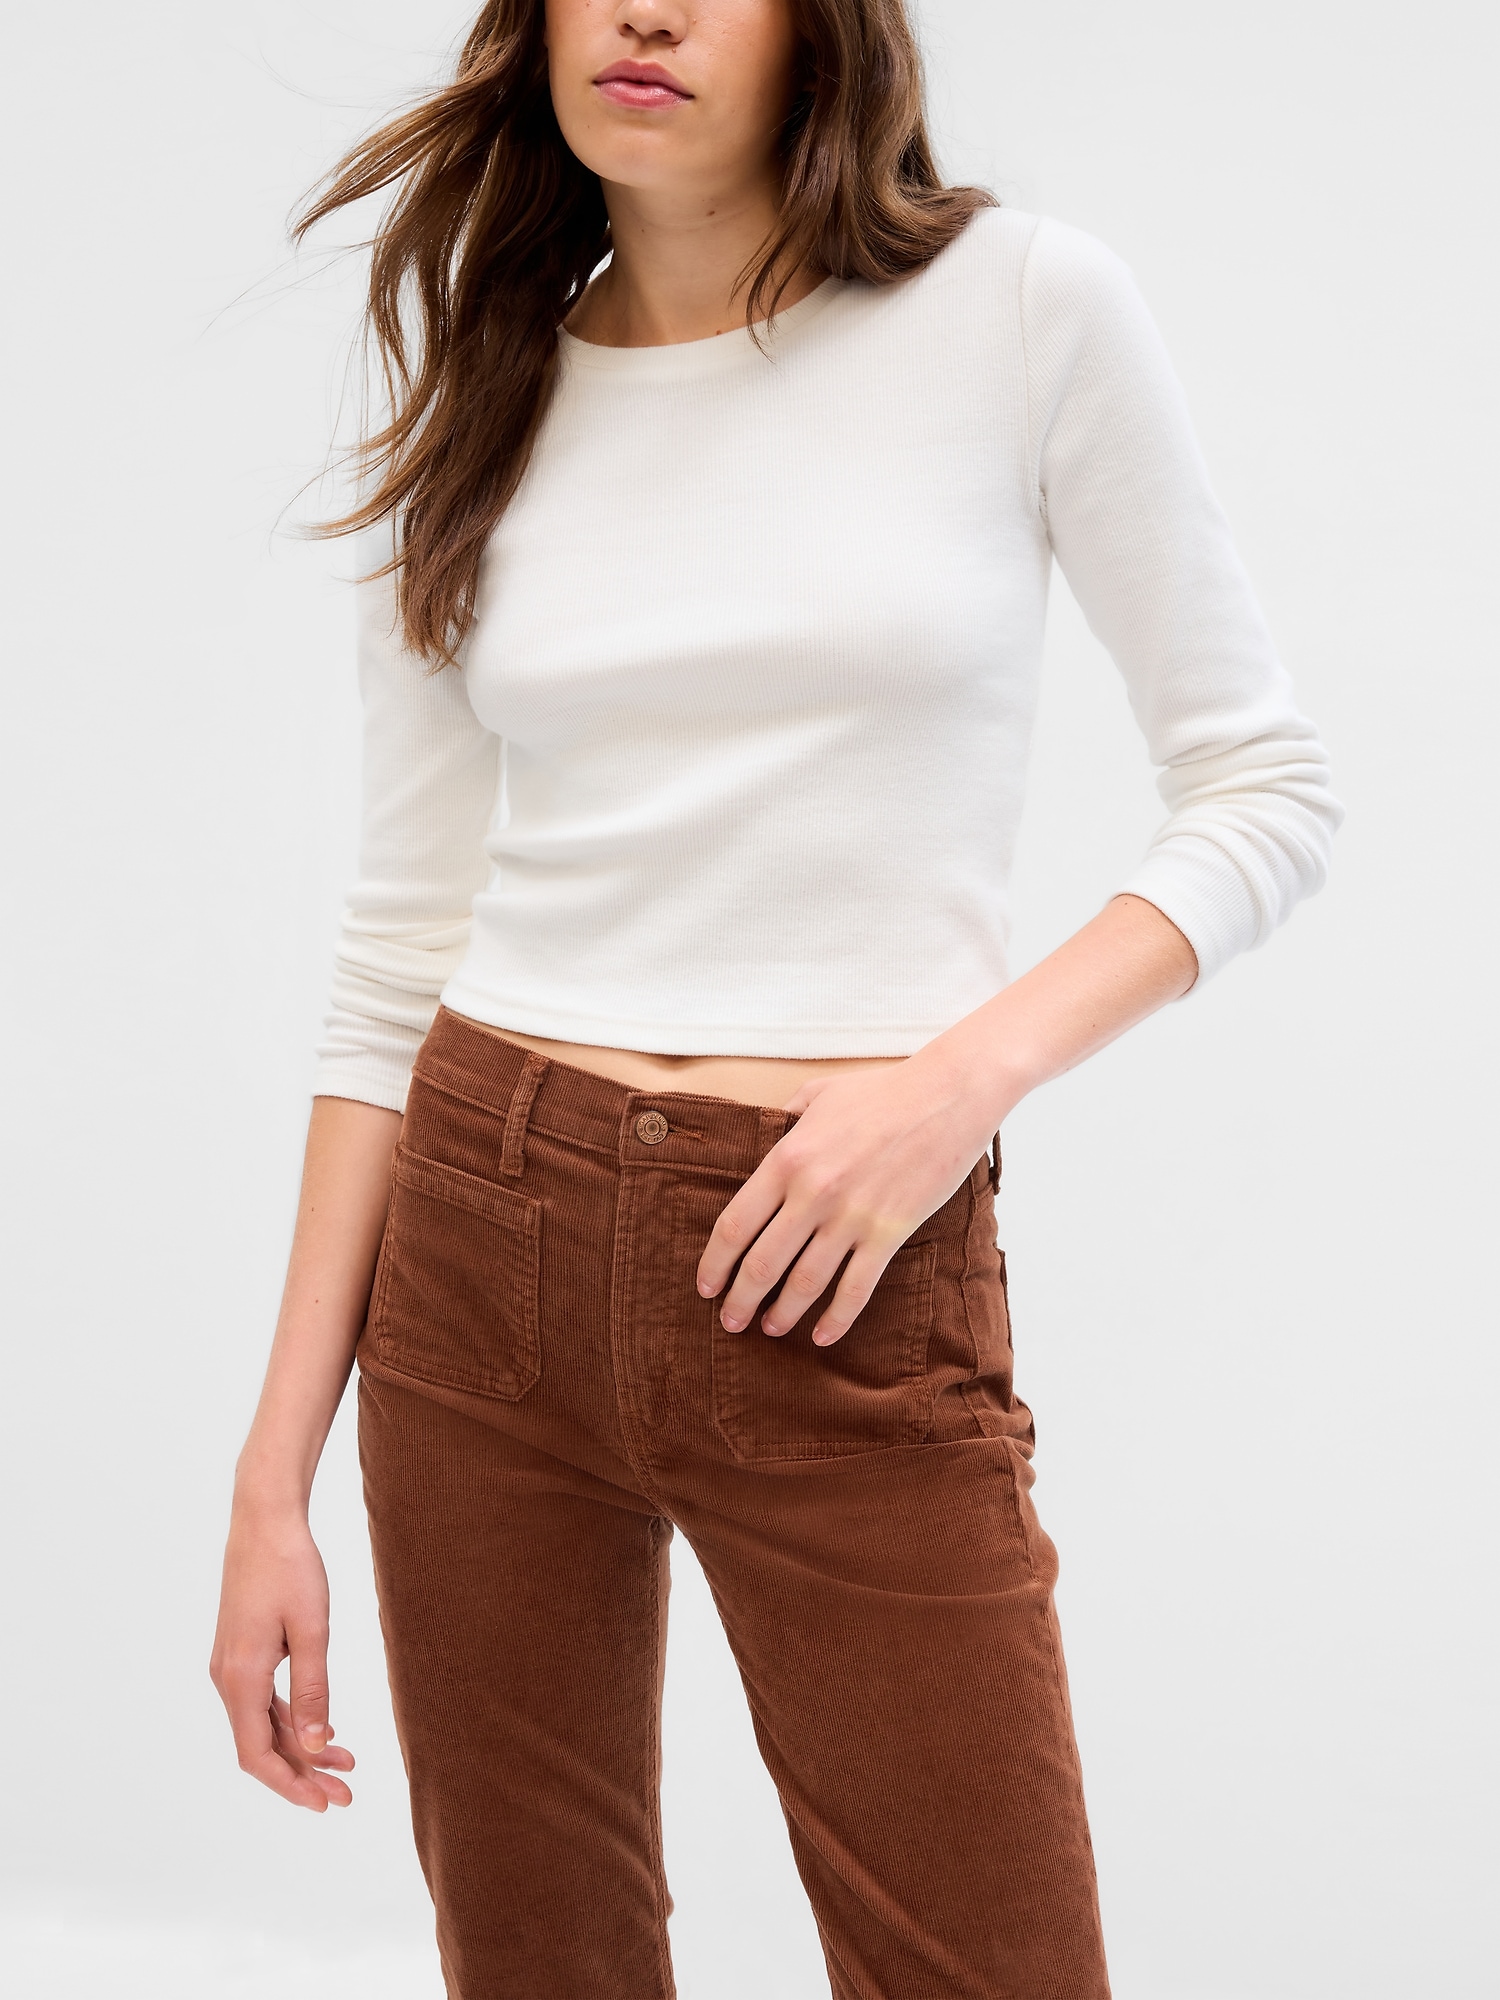 WEST OF MELROSE Womens Corduroy Flare Pants - CHESTNUT